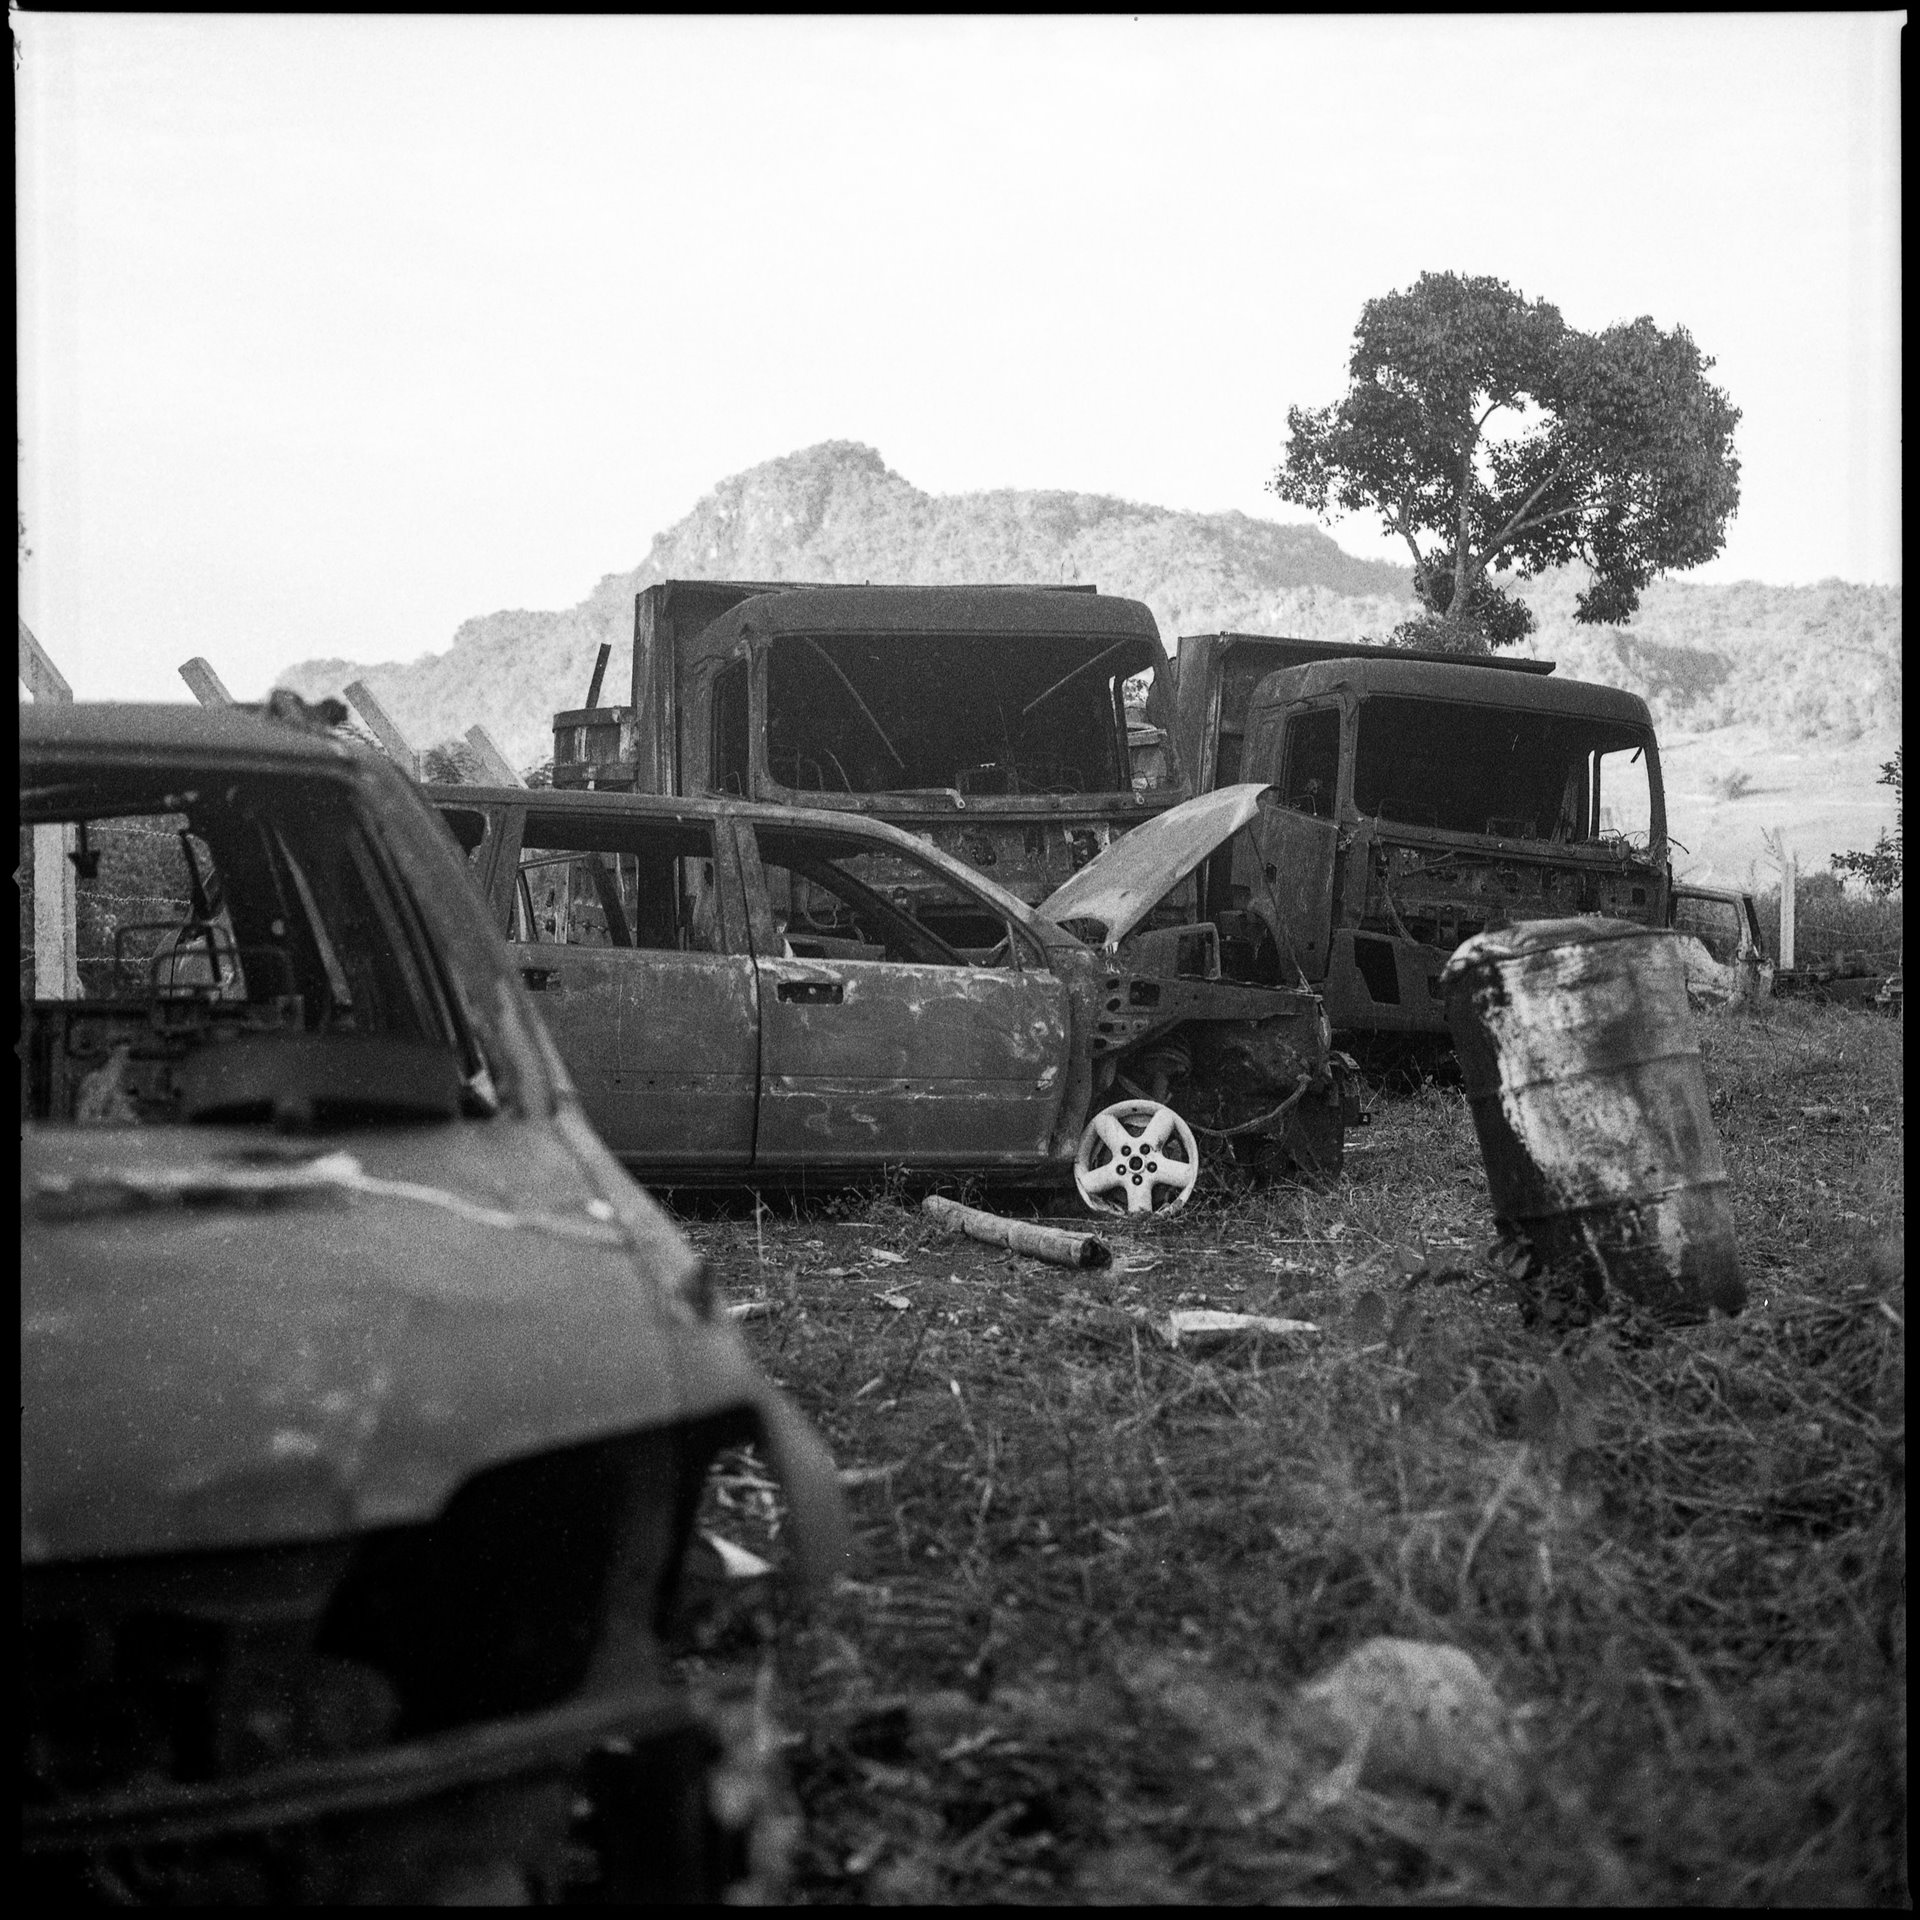 Derelict vehicles still stand near Mo So, Kayah (Karenni) State, Myanmar, a year after they were found burnt outside the village. According to state media, the drivers had refused to stop at a checkpoint. A villager told Associated Press the victims had been fleeing fighting and heading to a refugee camp. Over 30 bodies were found, including two Save the Children staff members.